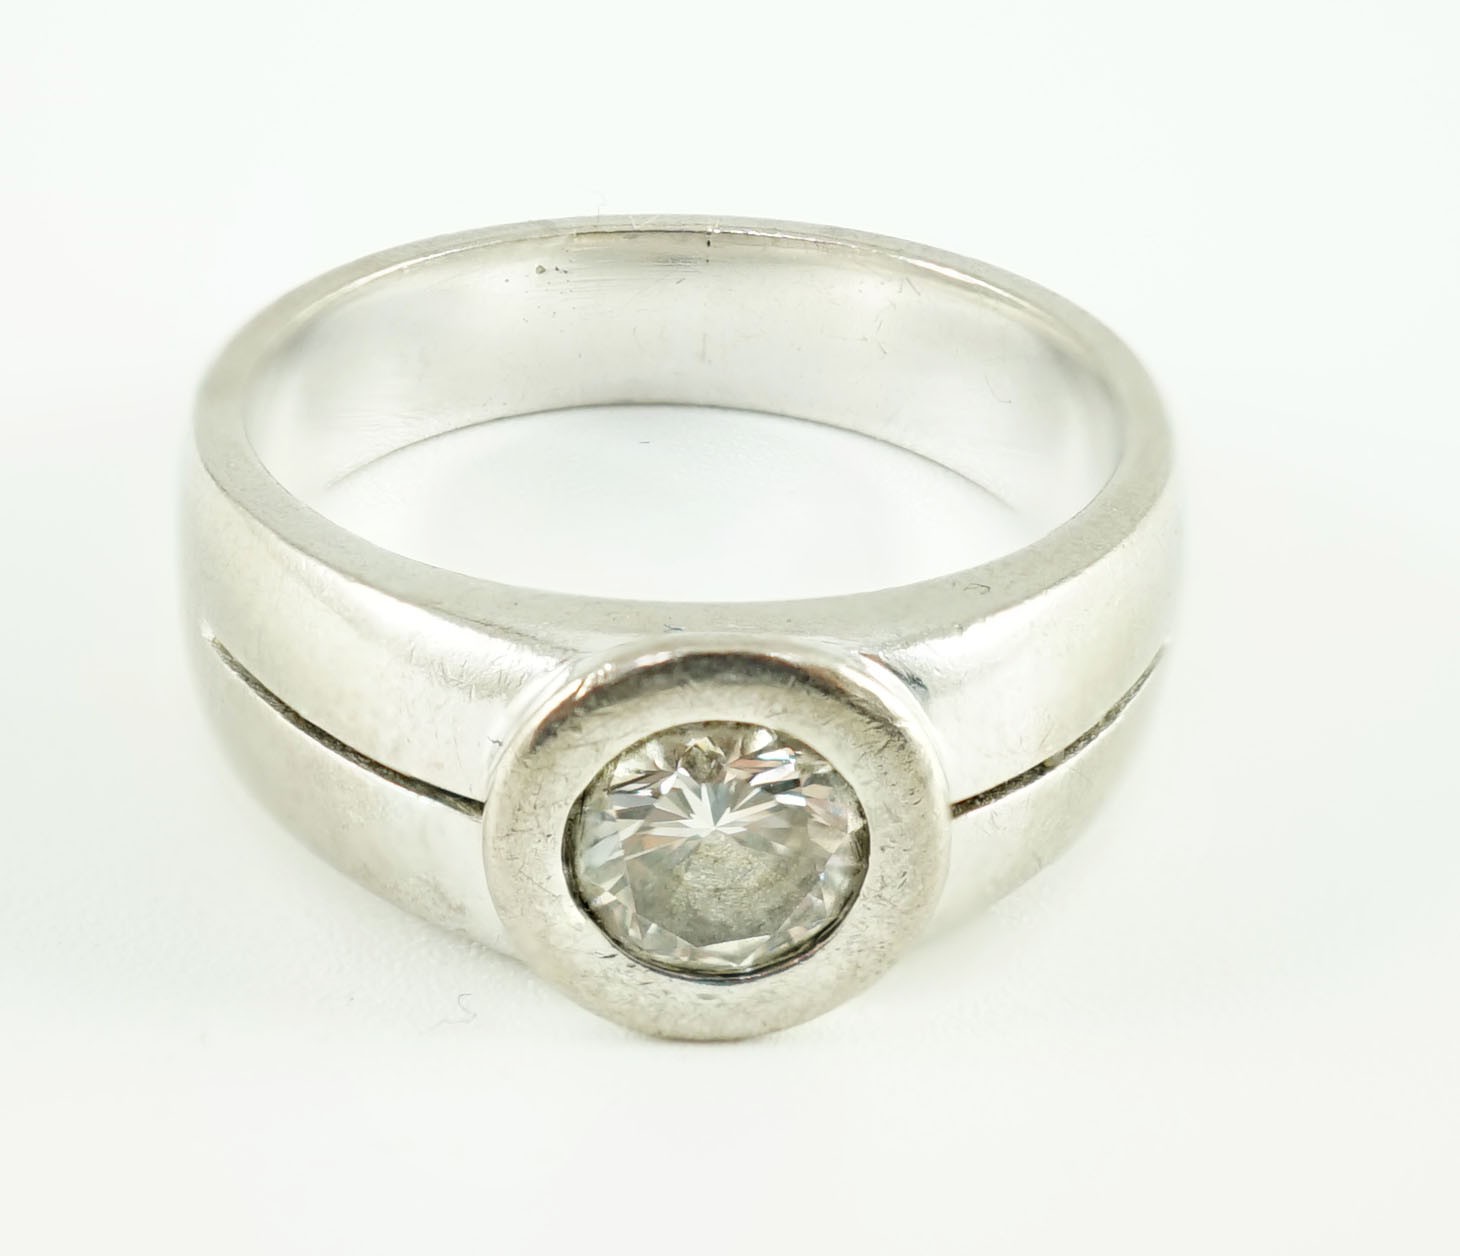 A modern 18k white gold and collet set solitaire diamond ring